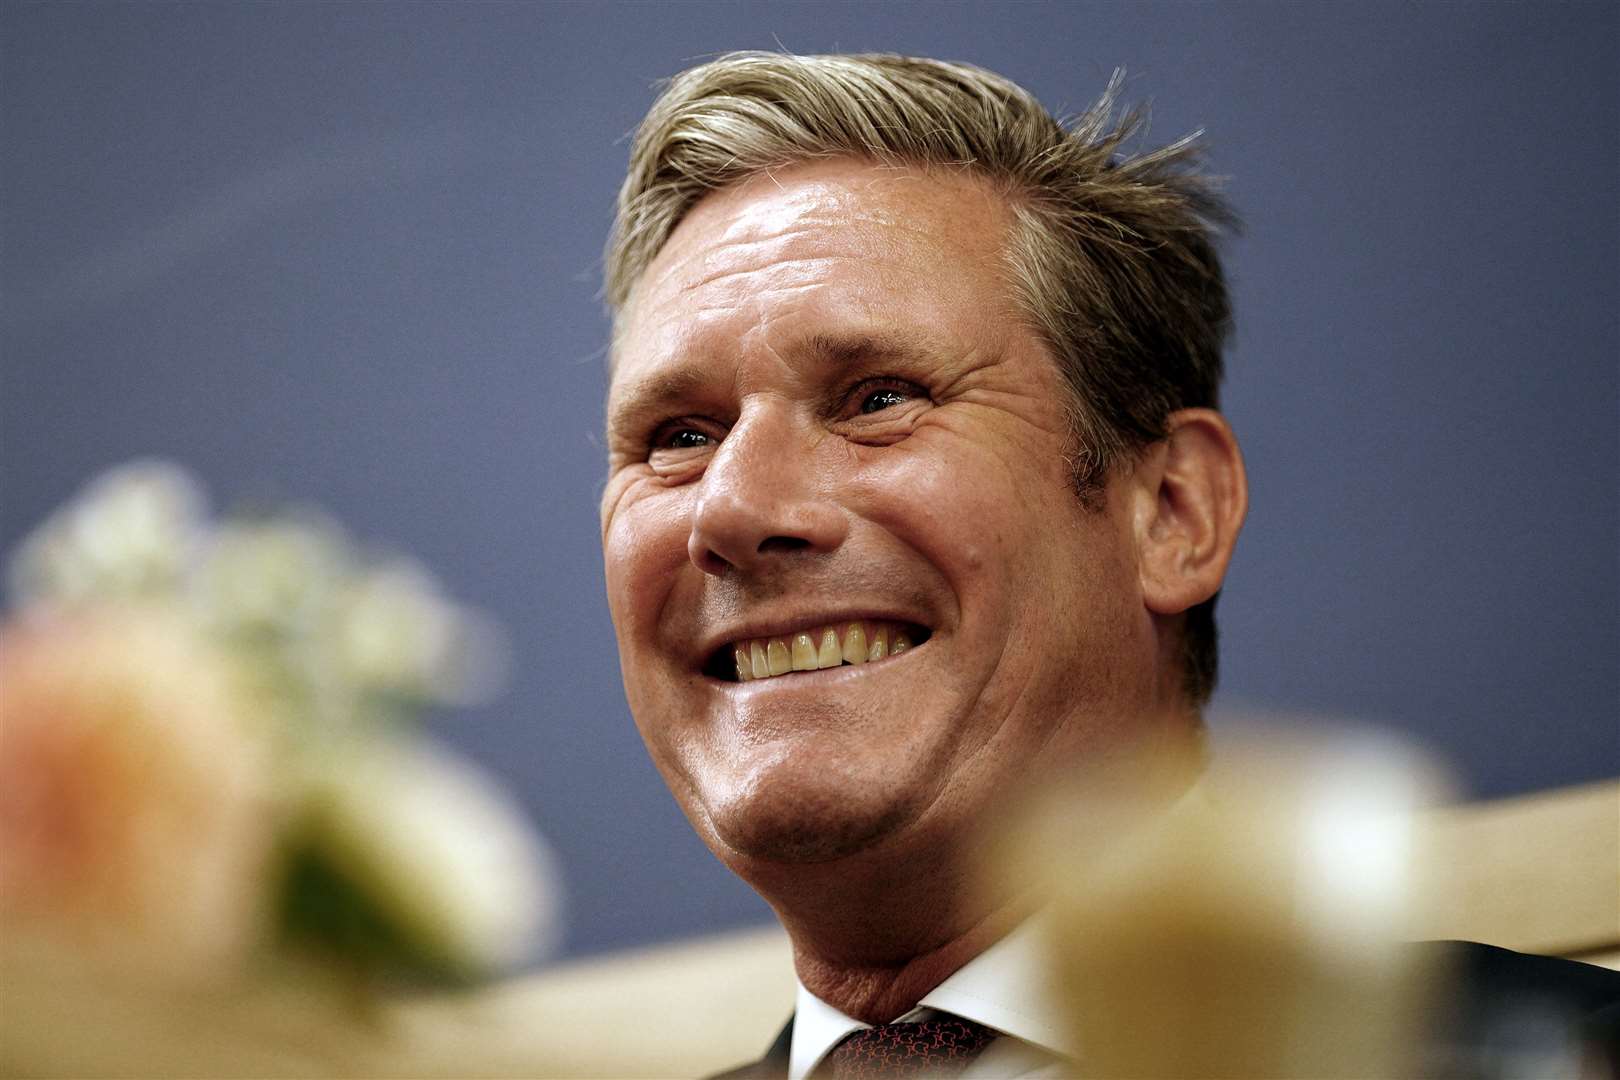 Labour leader Sir Keir Starmer did not rule out a need for his party’s own £30 billion plan to tackle the cost of living to be adjusted to a higher amount. (PA)